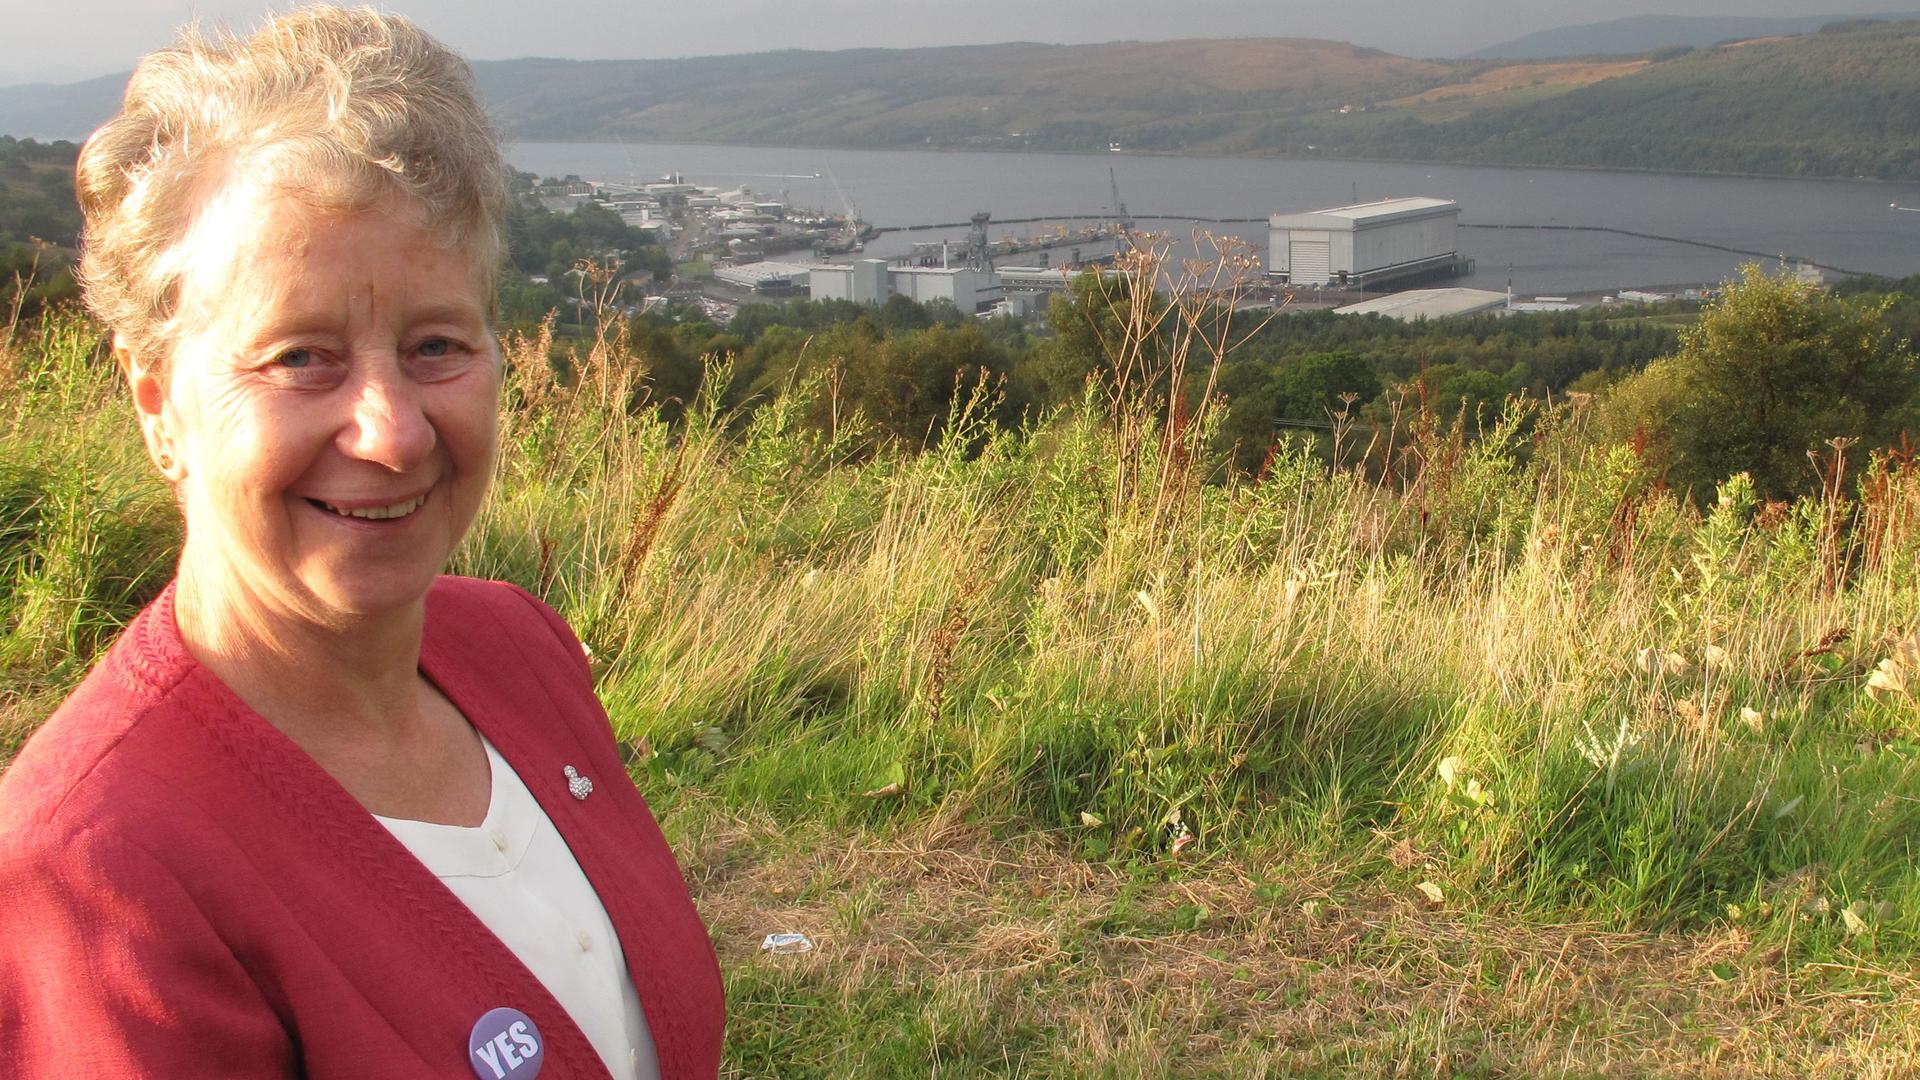 Vivien Dance, a vocal YES campaigner. She's standing in front of Faslane, the military installation that houses the UK's nuclear arsenal and employs some 6,000 people. 